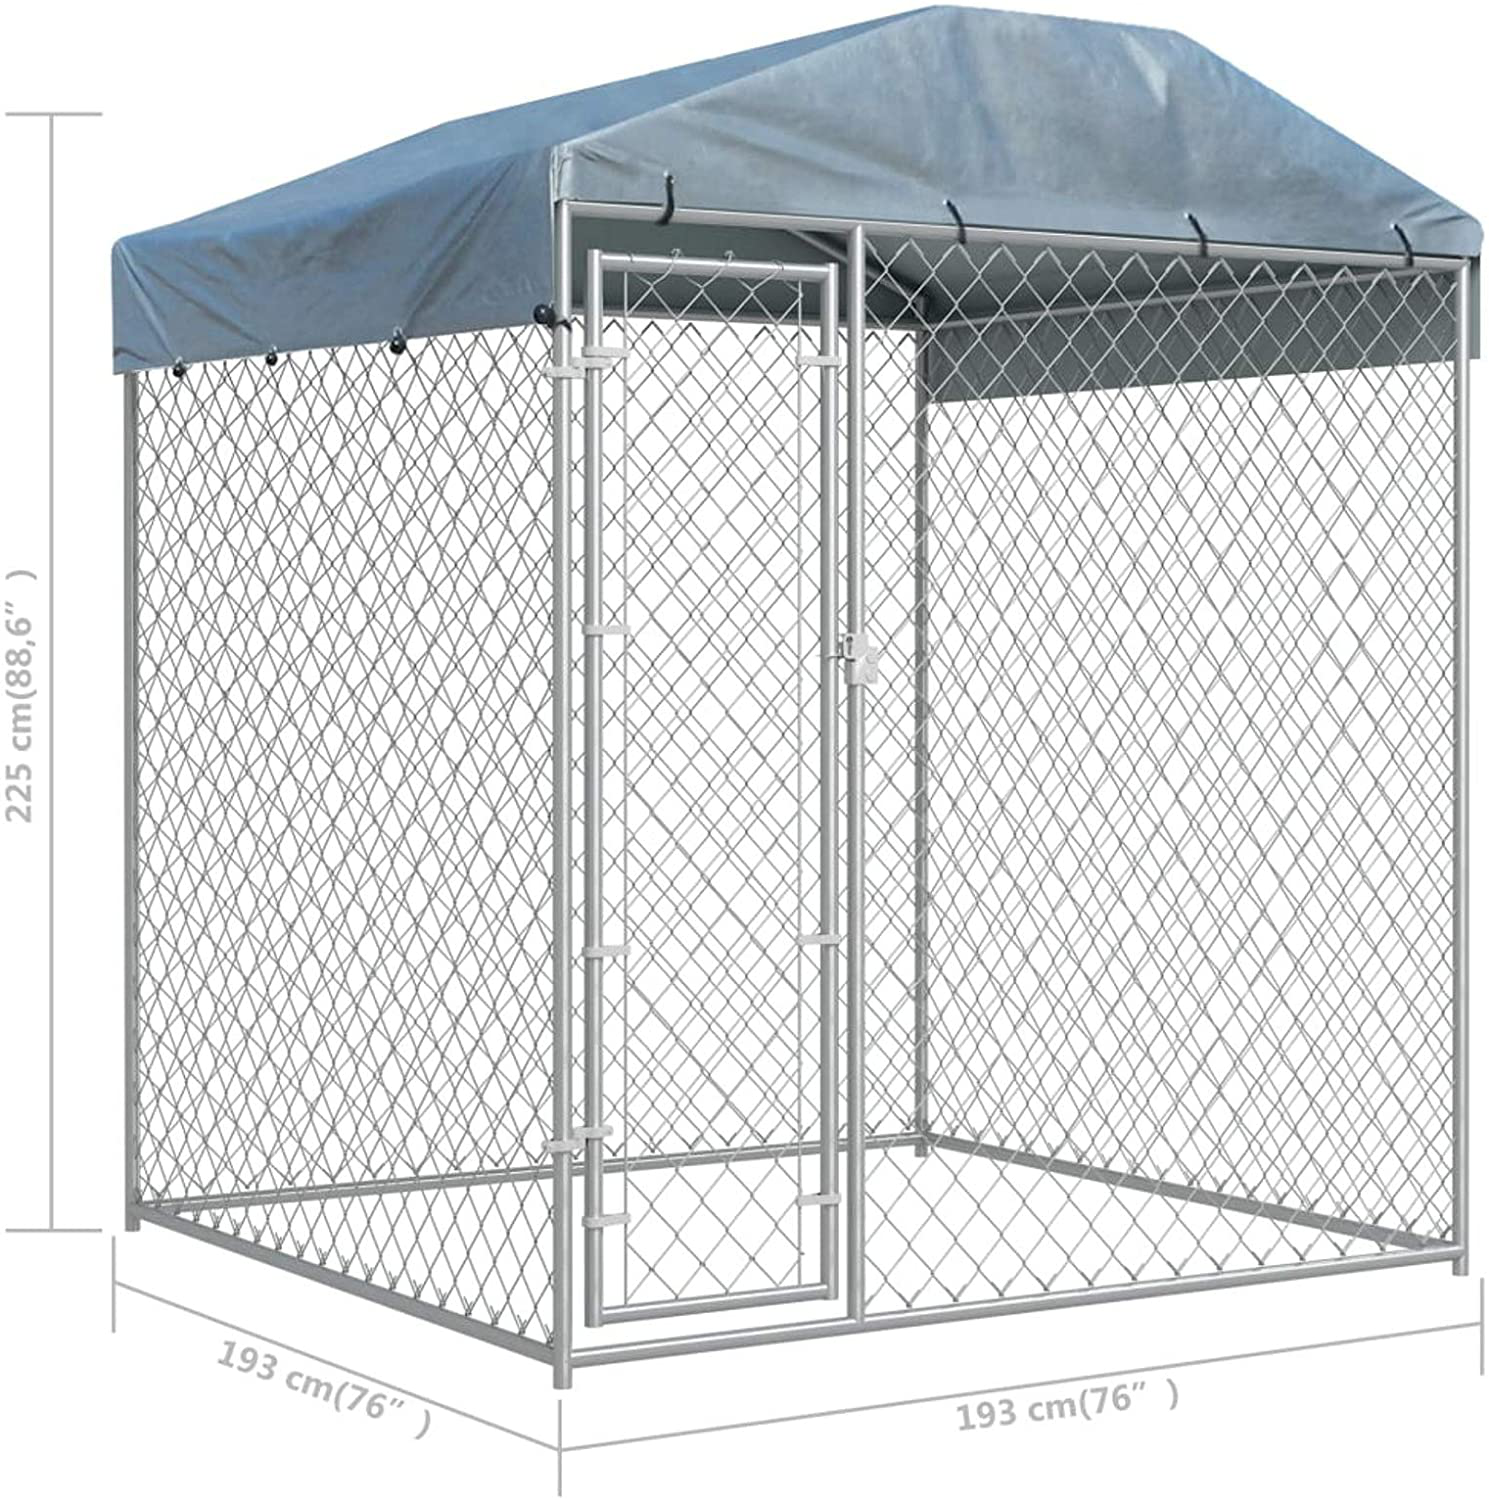 Tidyard Outdoor Dog Kennel Cage with Roof Canopy Lockable Galvanized Steel Pet Run House Chain-Link Mesh Sidewalls Exercise Fence Barrier for Backyard Garden 76 X 76 X 88.6 Inches (L X W X H)